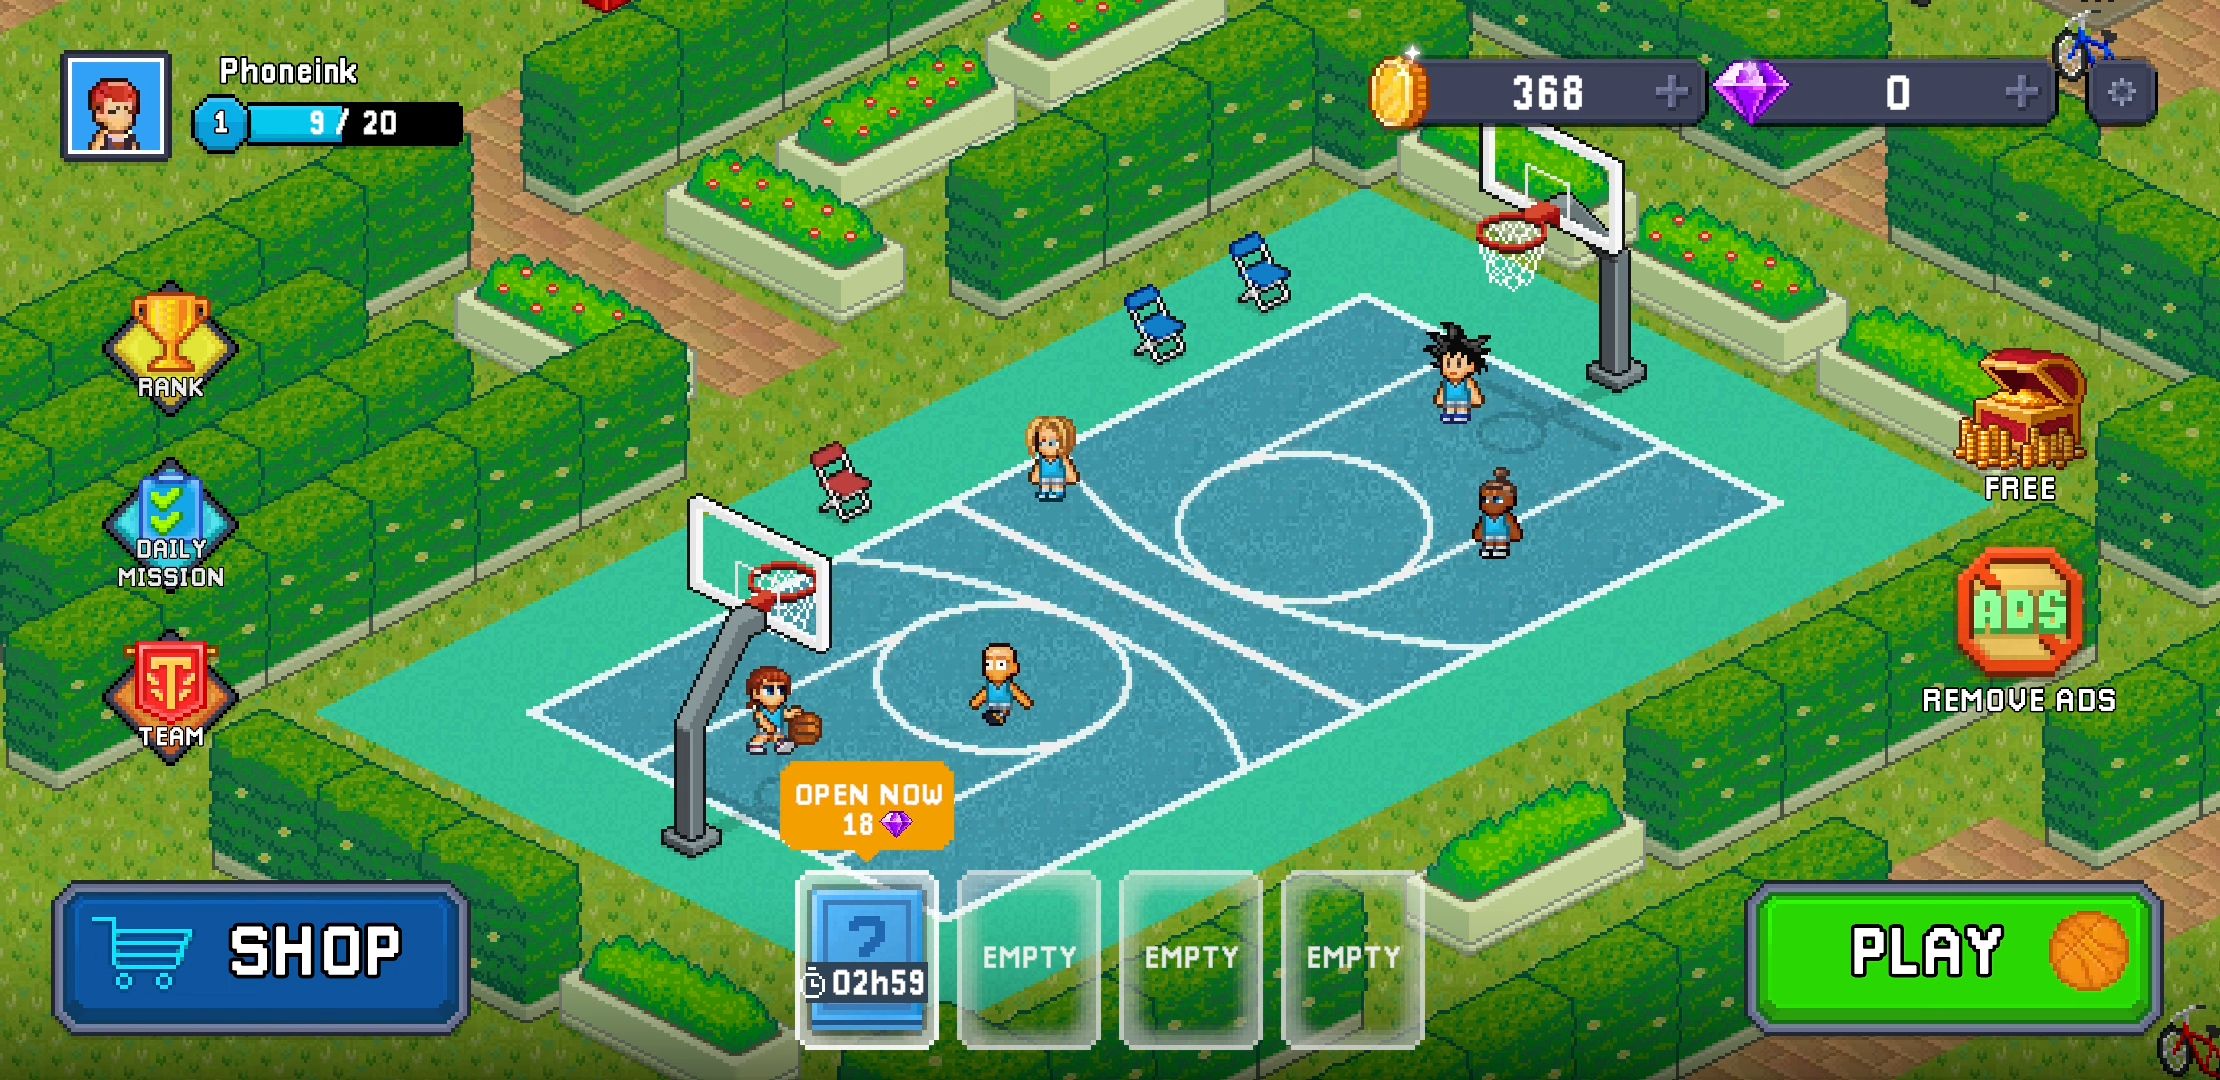 Gameplay of the Pixel Basketball: Multiplayer for Android phone or tablet.